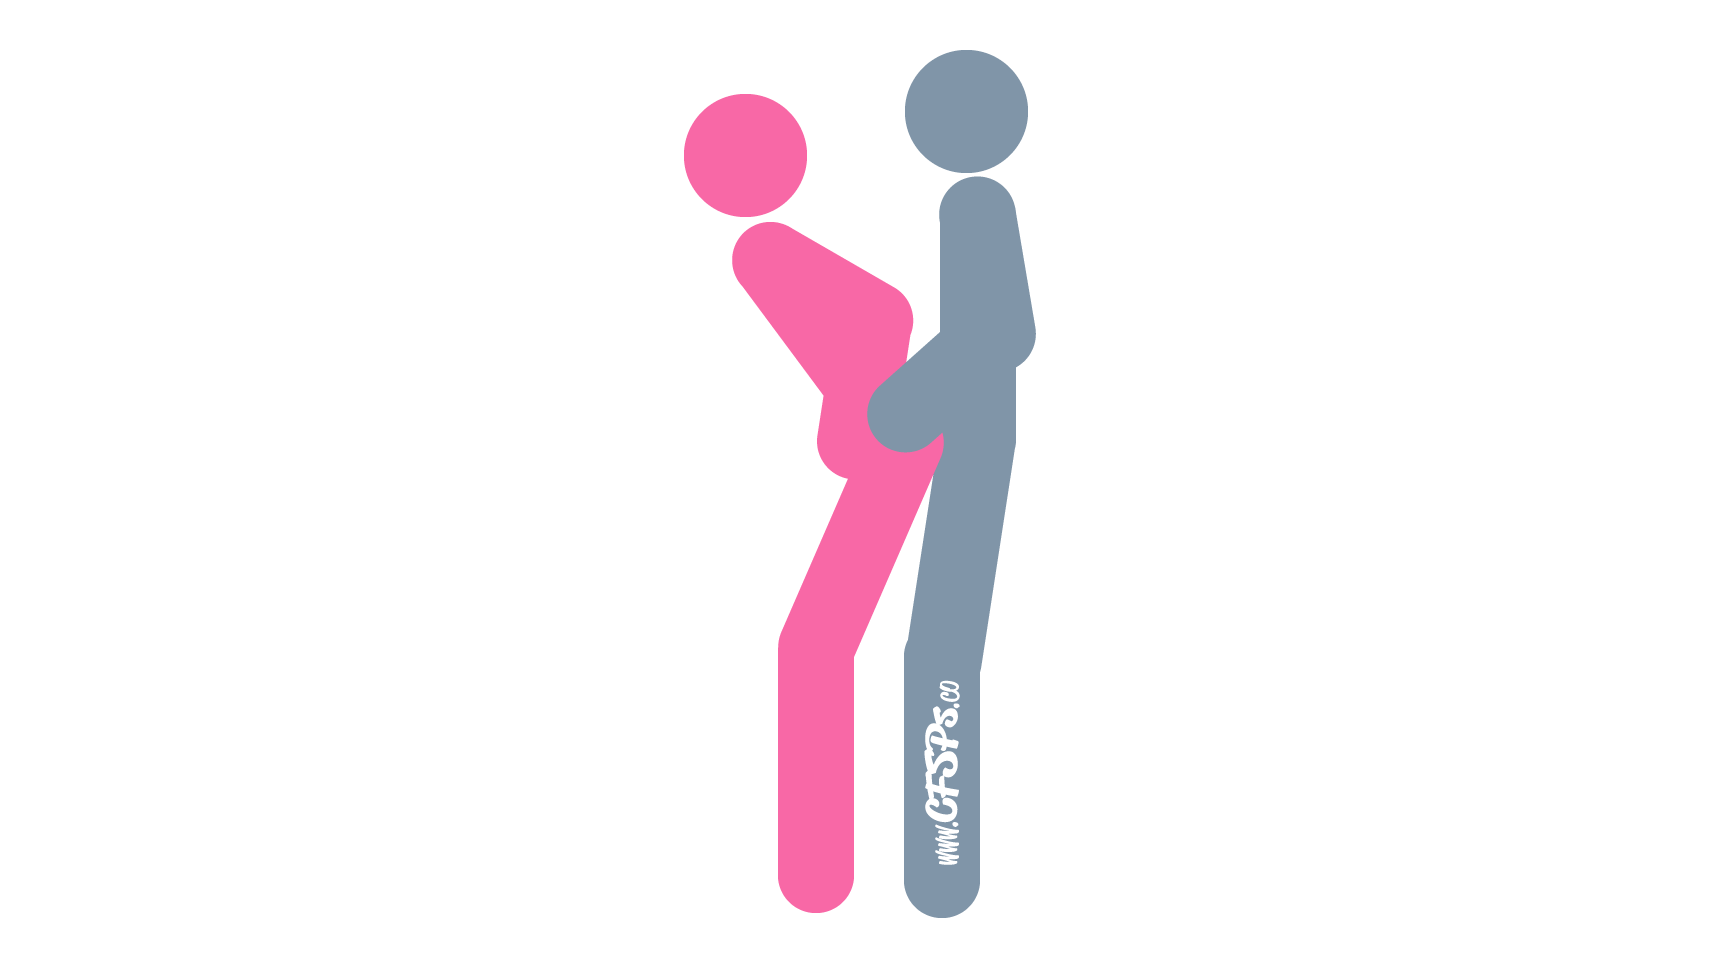 This stick figure image depicts a man and woman having sex in the From Behind sex position. The man is standing. The woman is standing in front of him with her back to him. She's leaning forward a little with her hands on her upper thighs. The man's hands are on her hips.